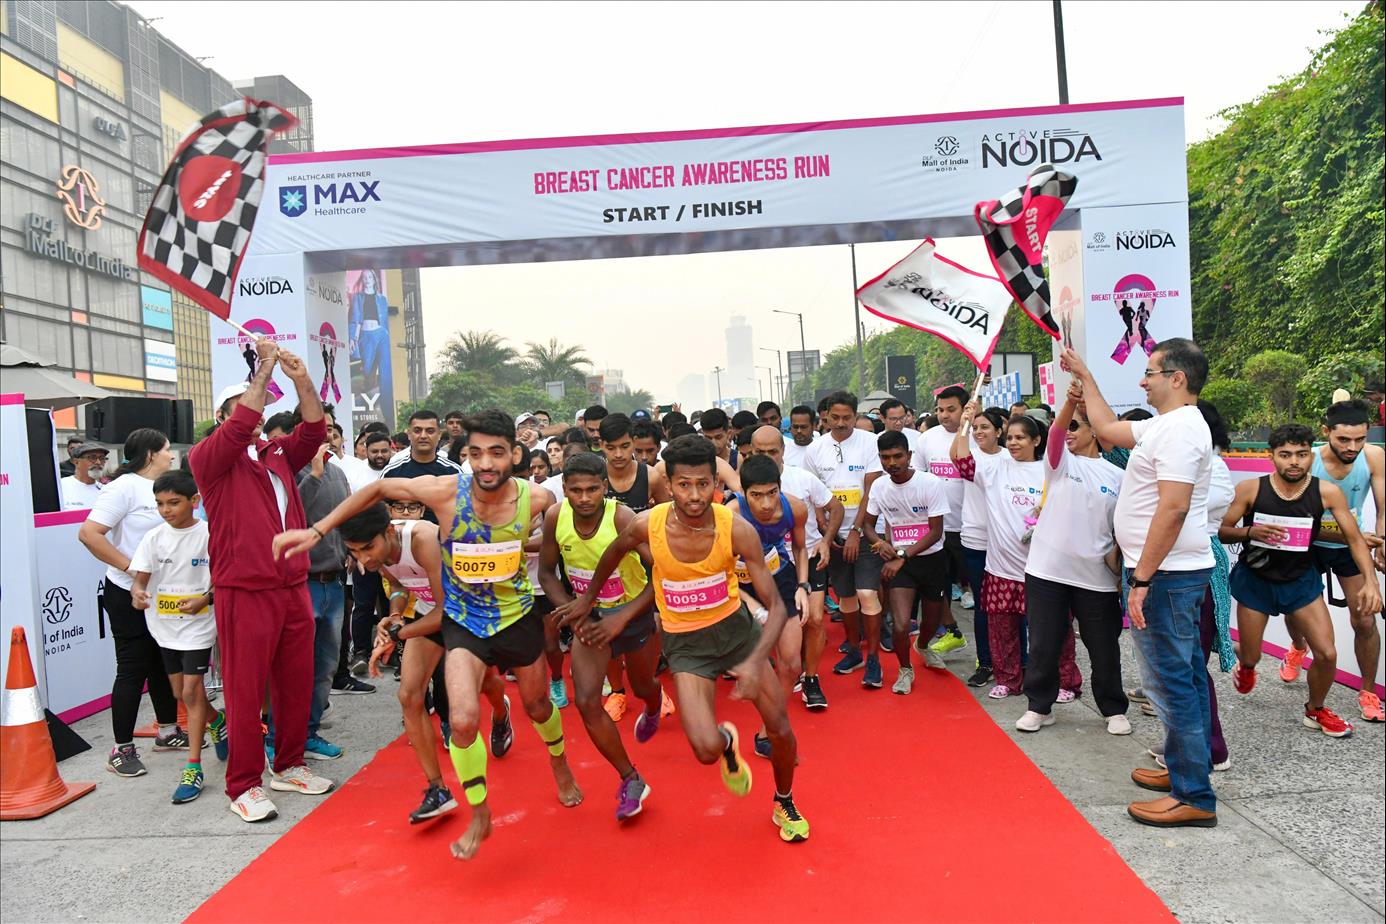 DLF Mall Of India's ACTIVE NOIDA Is Back With A Remarkable Awareness Run Against Breast Cancer